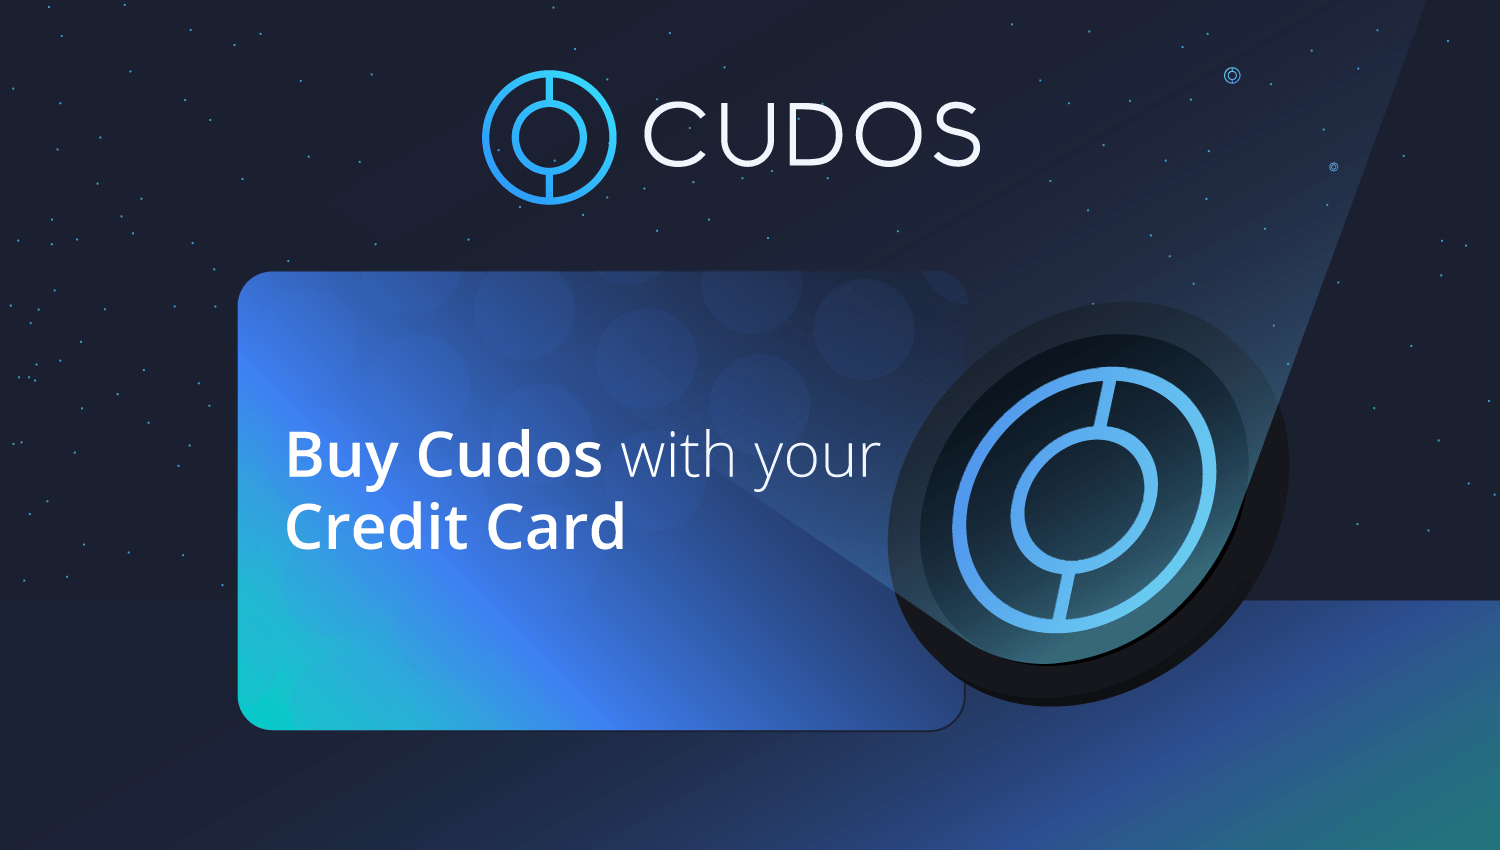 Get your hands on CUDOS tokens using just your credit or debit card